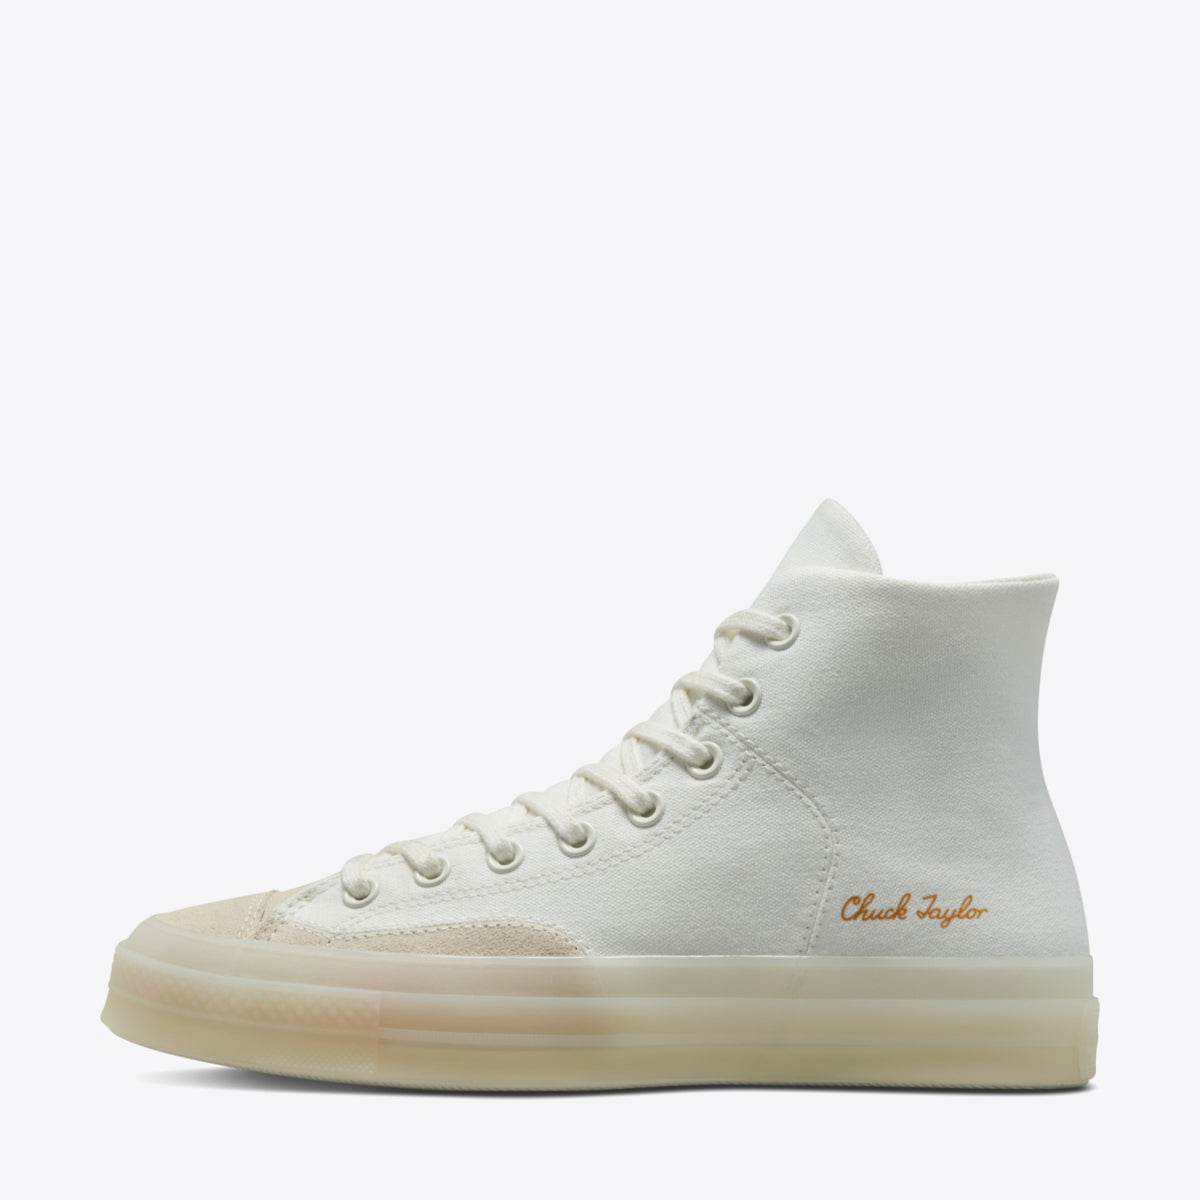 CONVERSE Chuck Taylor 70 Marquis High Vintage White - Image 3